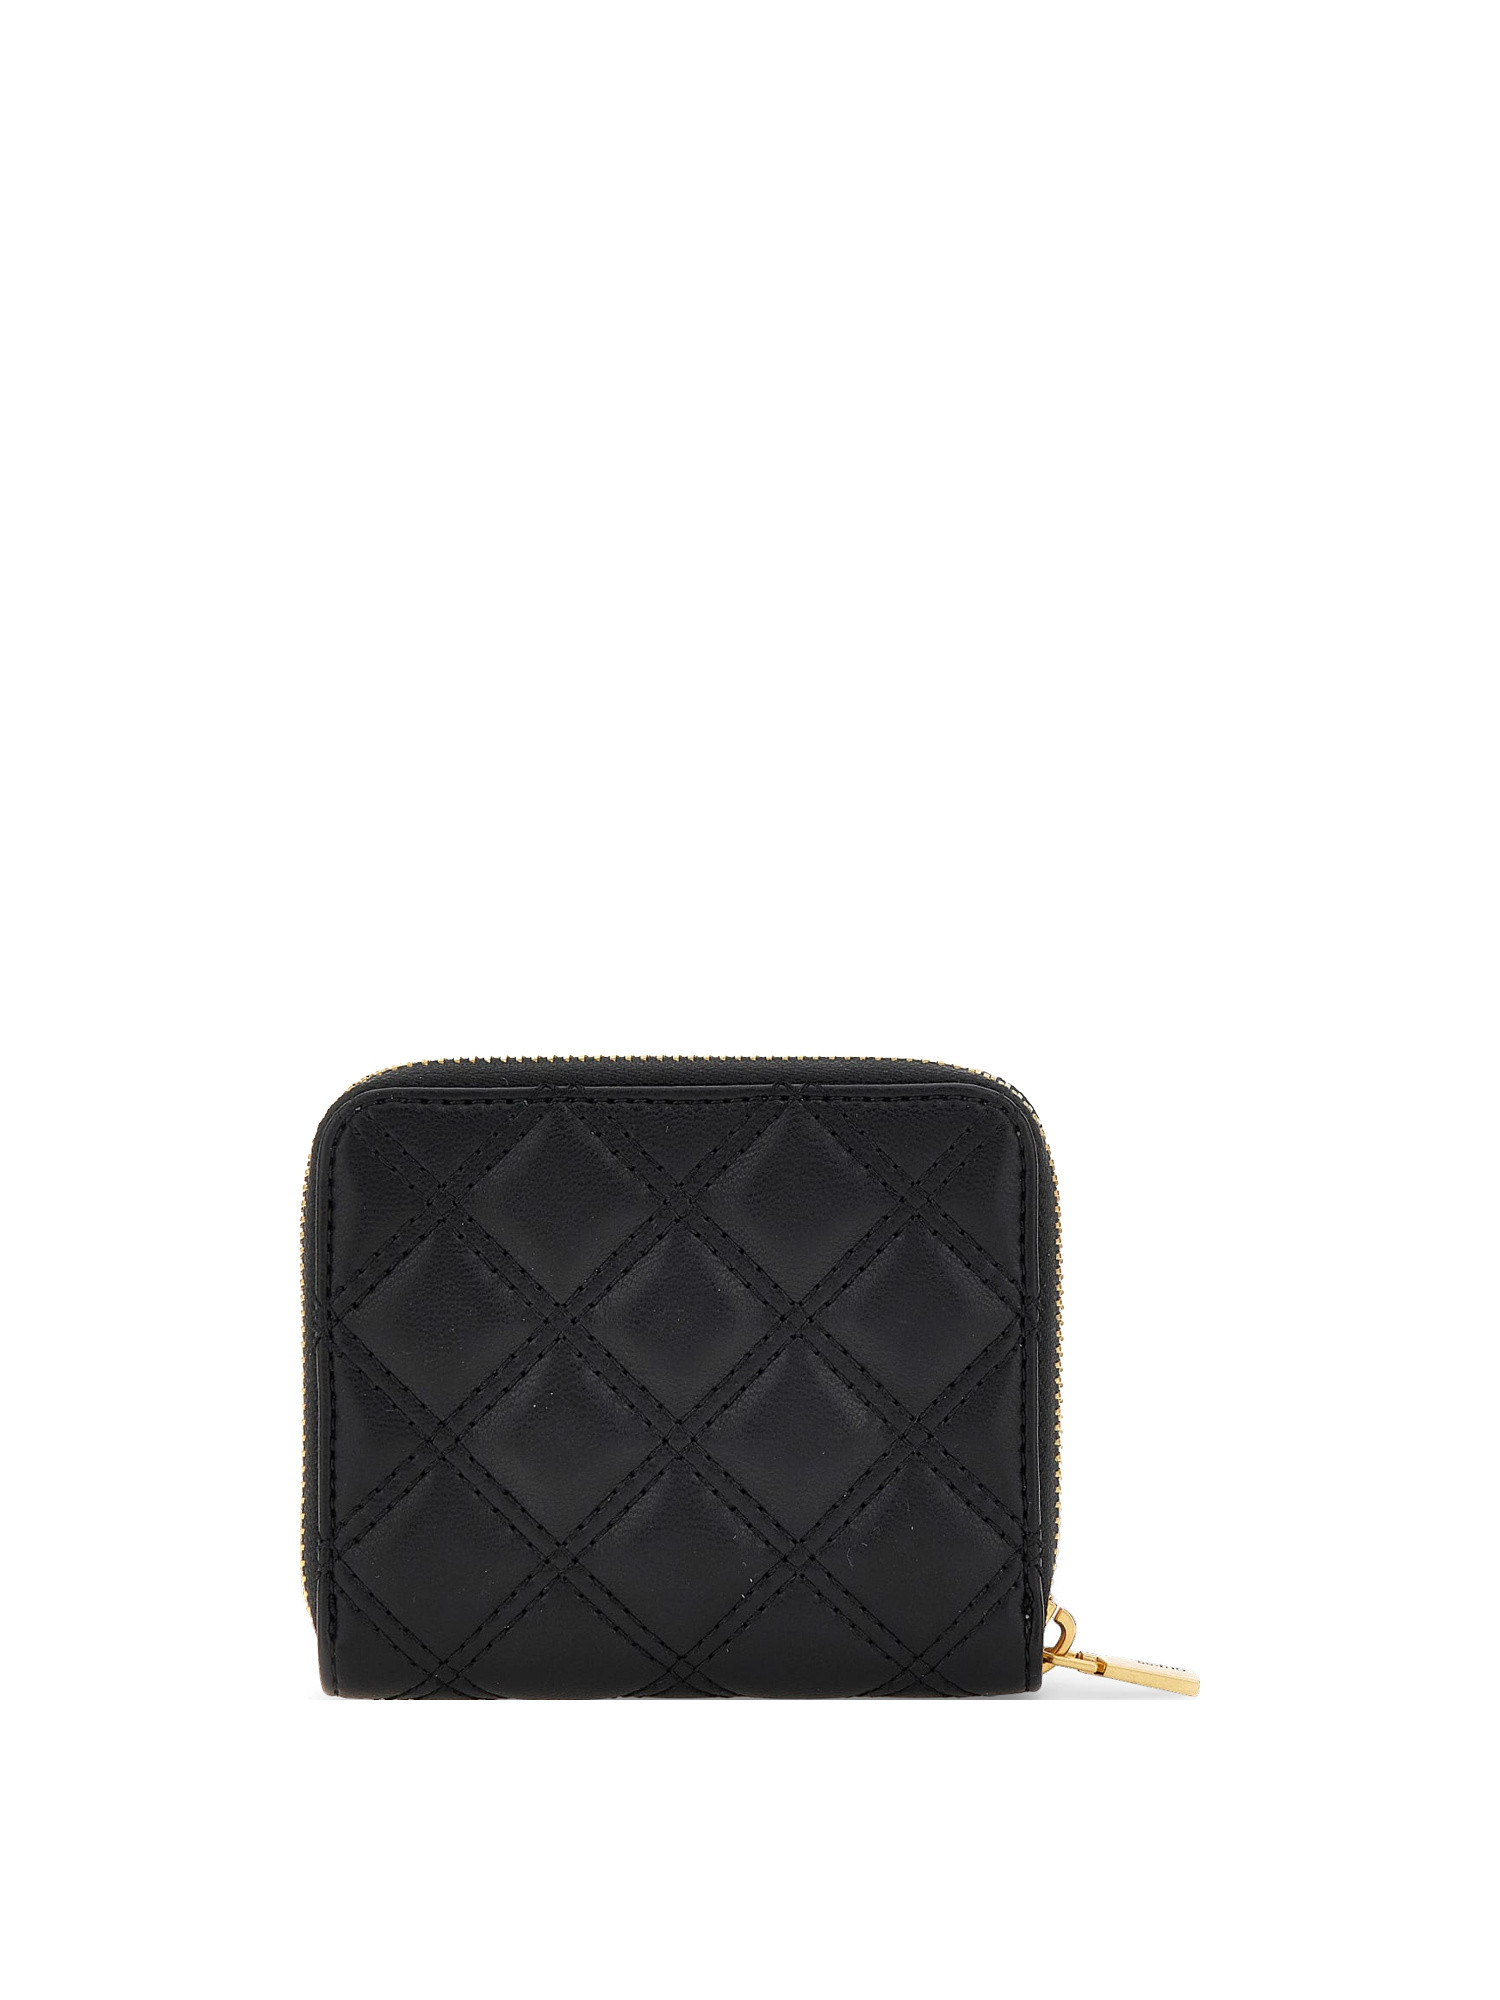 Guess - Giully quilted mini wallet, Black, large image number 1